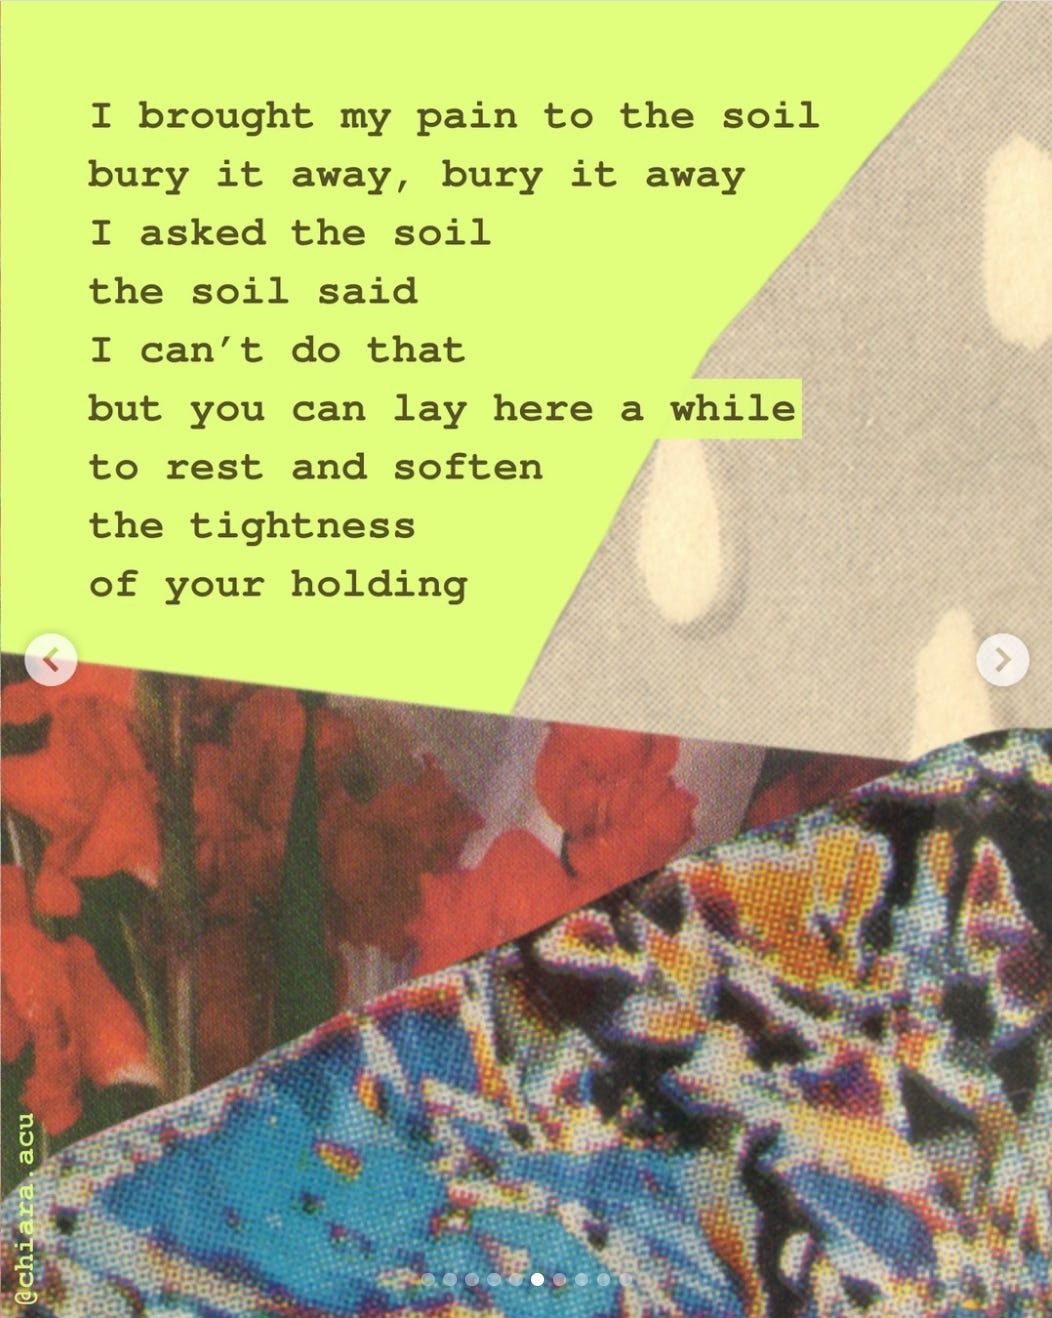 Collage of paper cutouts of blue and red flowers, printed cloth on a pale neon yellow background and brown text. The text reads, "I brought my pain to the soil. bury it away, bury it away i asked the soil. the soil said i can't do that but you can lay here a while to rest and soften the tightness of your holding."